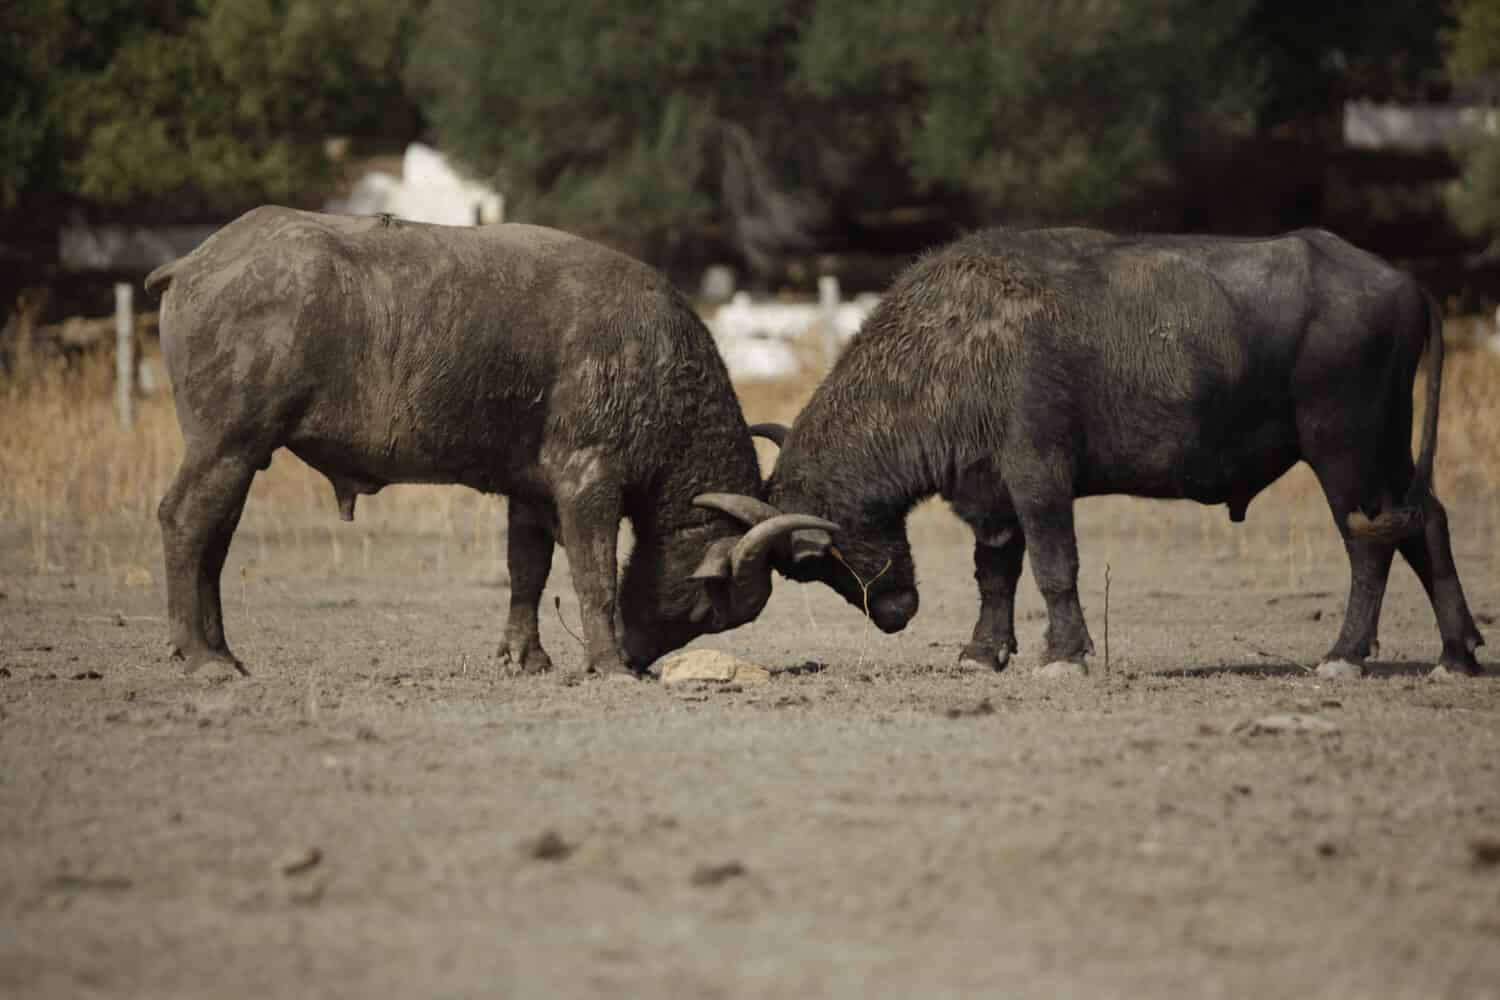 Two huge water buffalos fighting on a sandy soil in tunisian national park